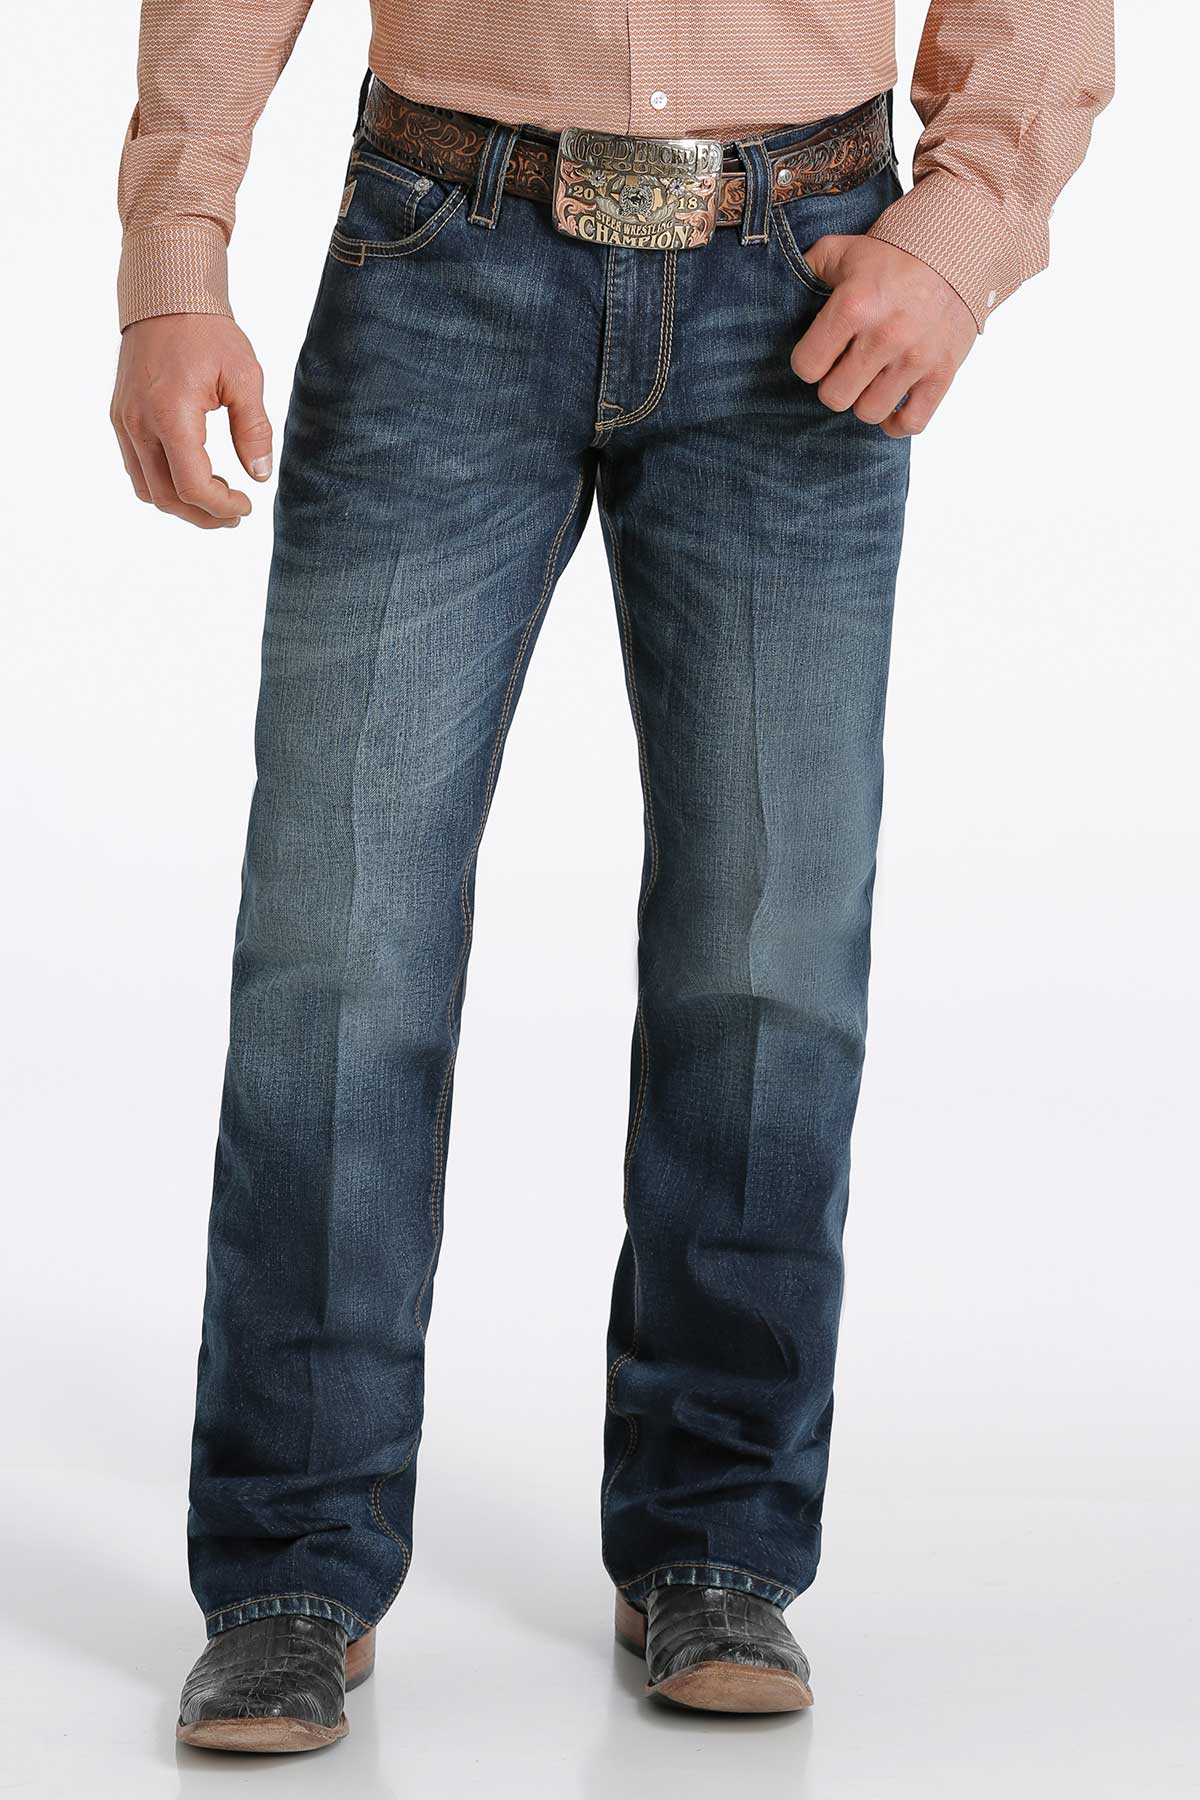 Cinch Carter 2.0 Relaxed Fit Jean